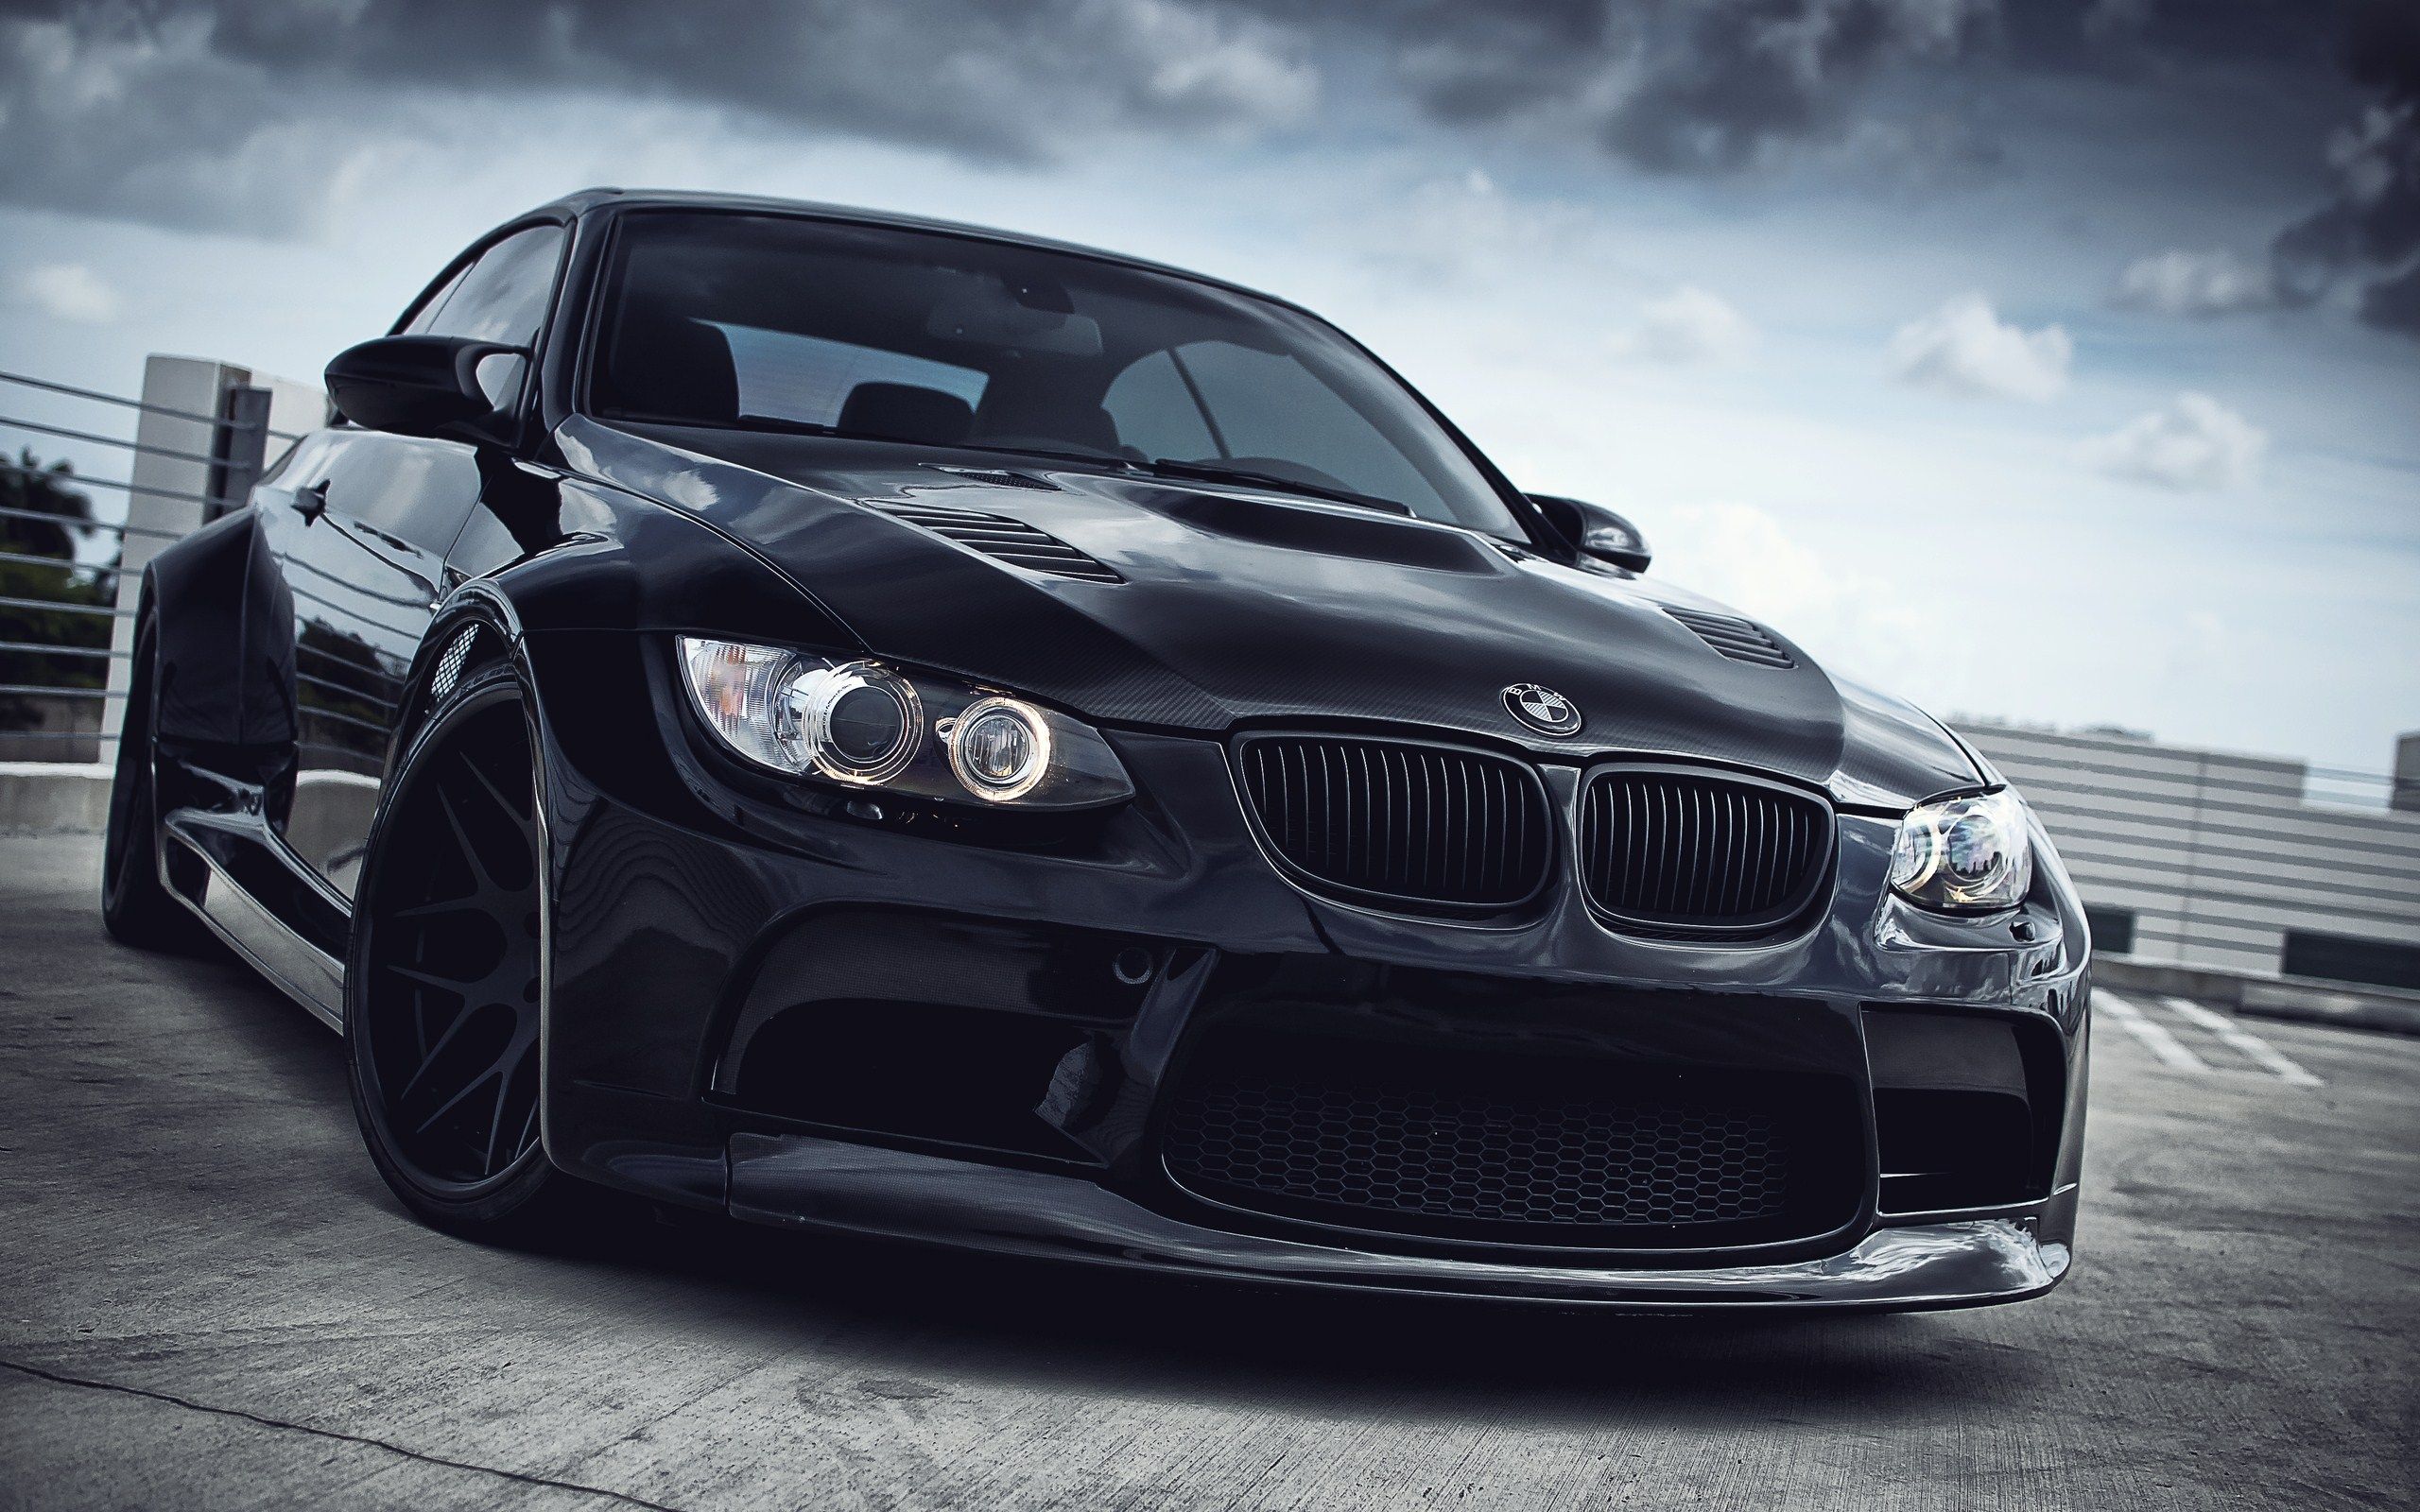 Bmw M3 Wallpapers Gallery Of 45 Bmw M3 Backgrounds Hd Wallpaper Bmw Car 2560x1600 Wallpaper Teahub Io